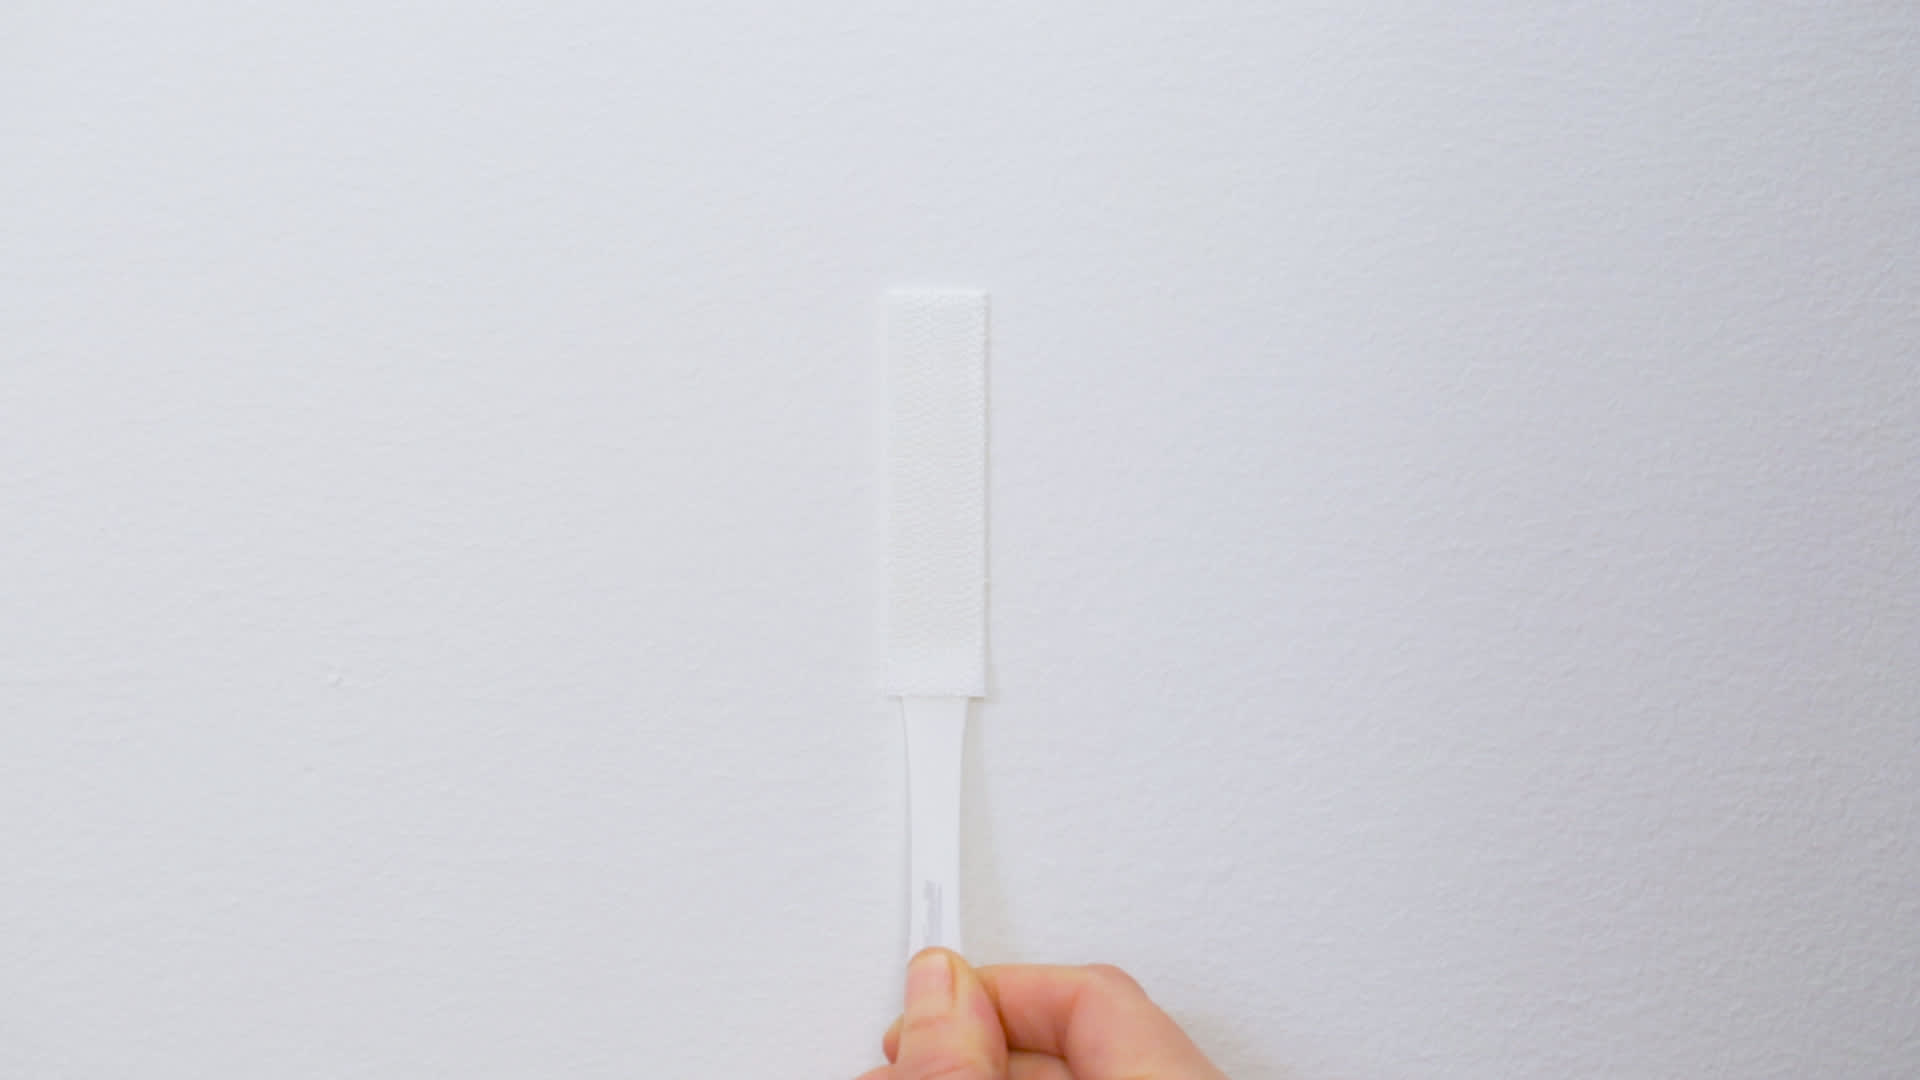 5 Surprisingly Brilliant Ways to Use Command Strips